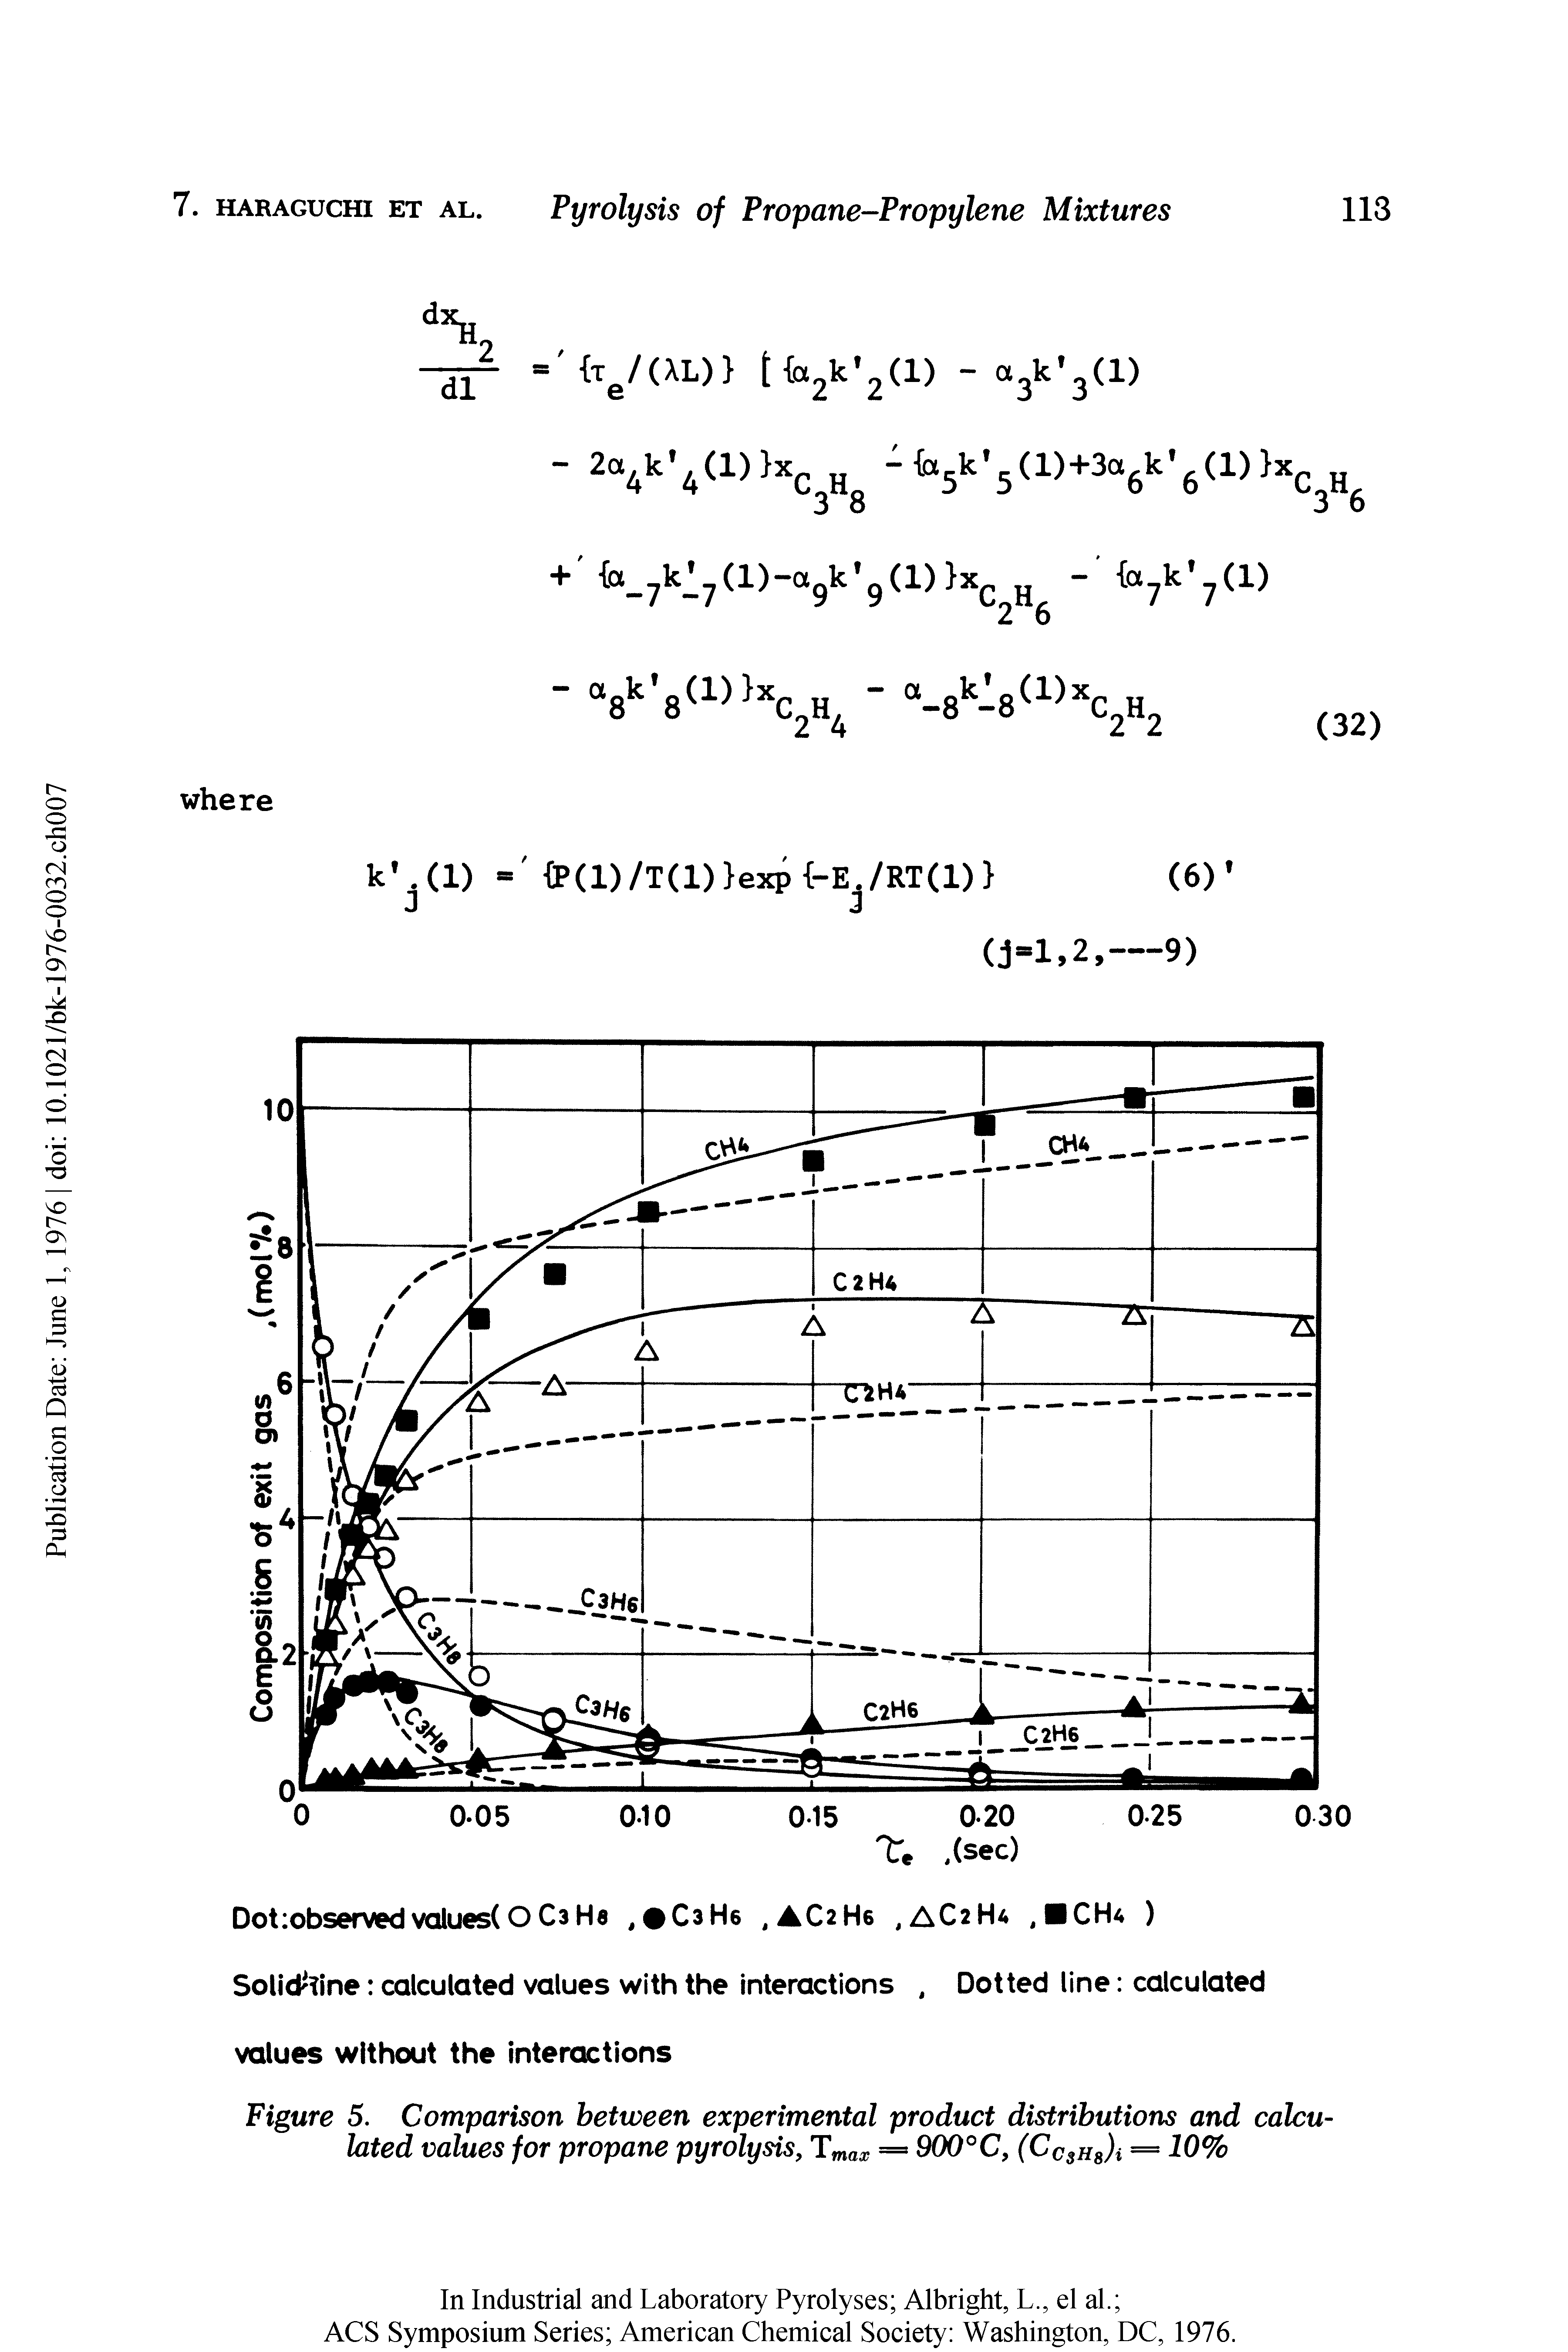 Figure 5. Comparison between experimental product distributions and calculated values for propane pyrolysis, Tmaa = 900°C, (CcsHgh = 10%...